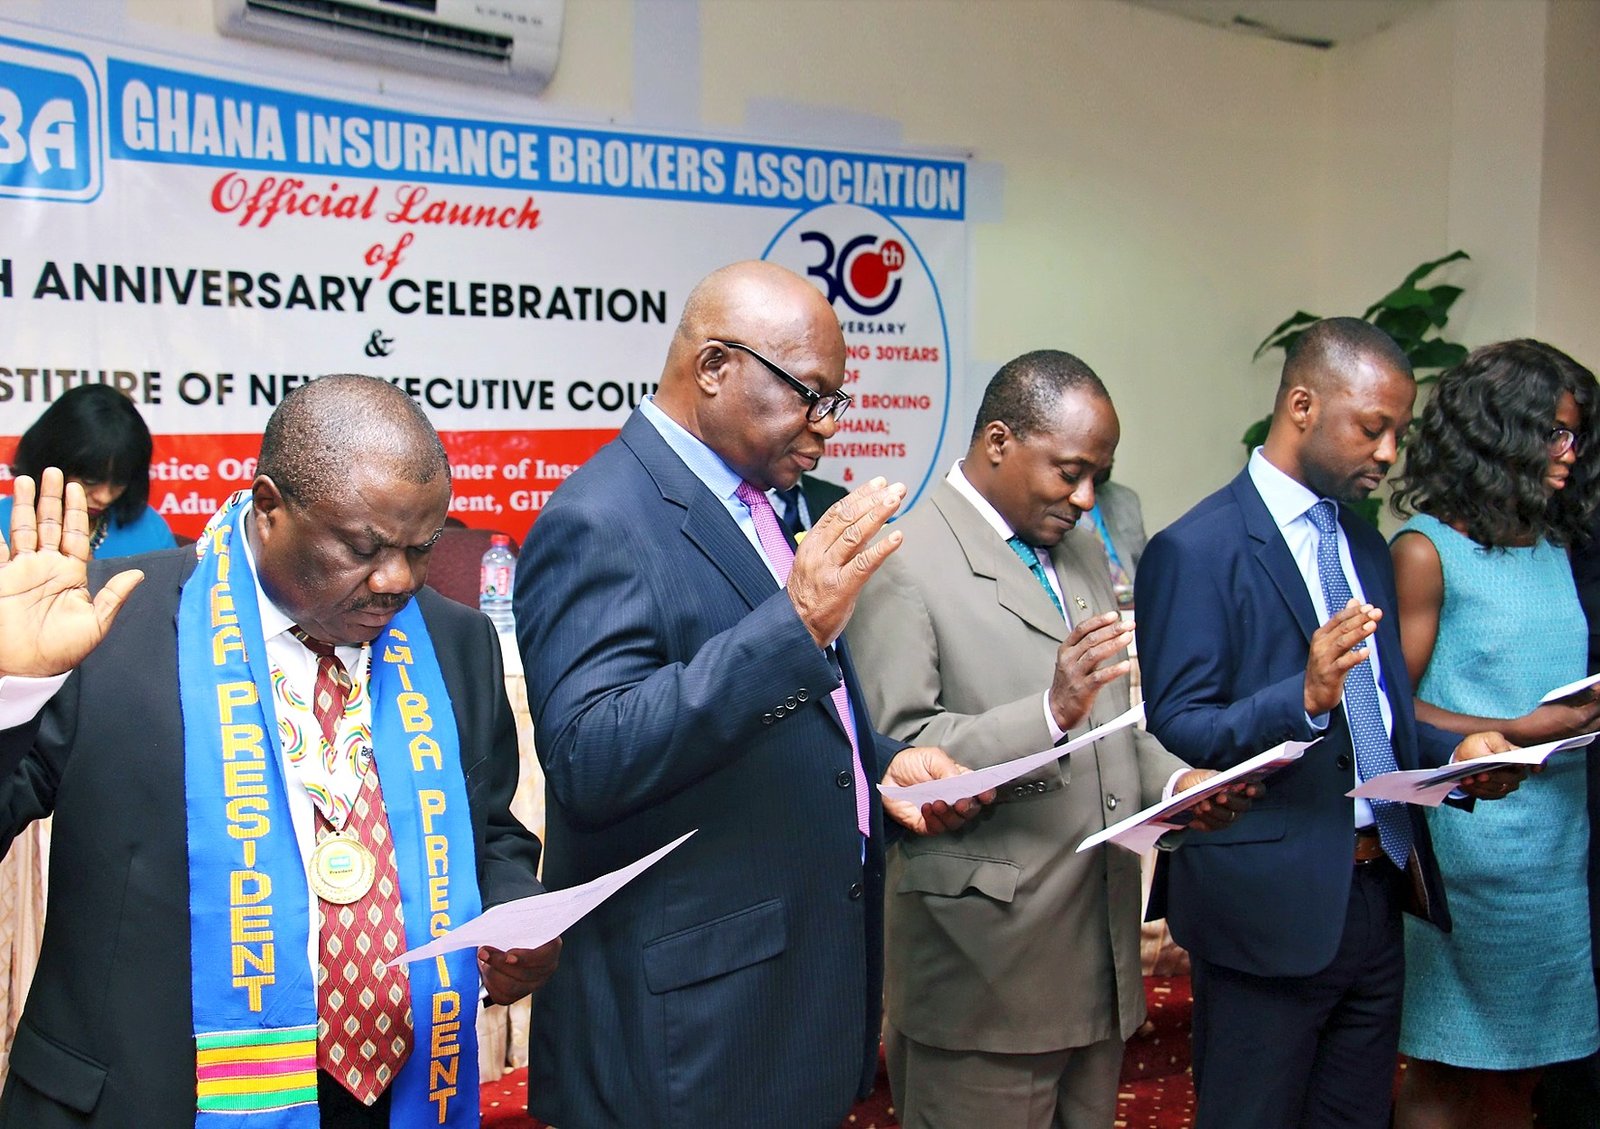 Anniversary Celebration and witness the swearing-in of the new Executive Council members